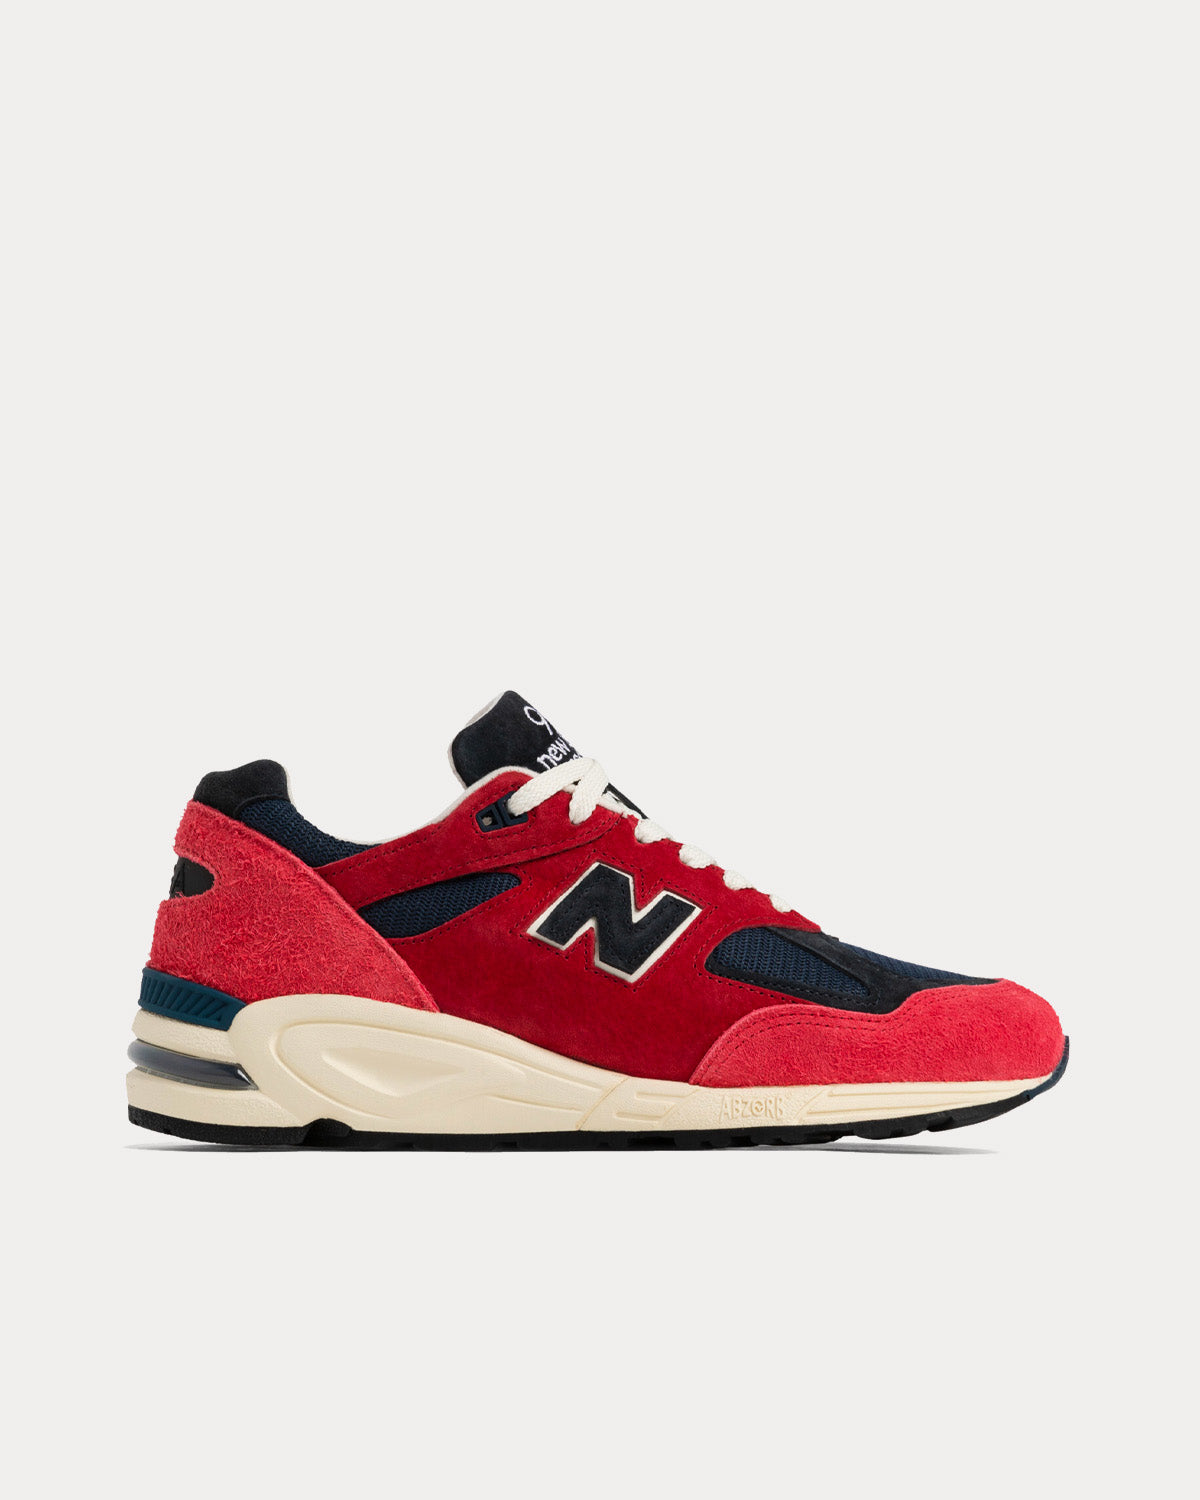 New Balance MADE in USA 990v2 Chrysanthemum with NB Navy Low Top Sneakers -  Sneak in Peace